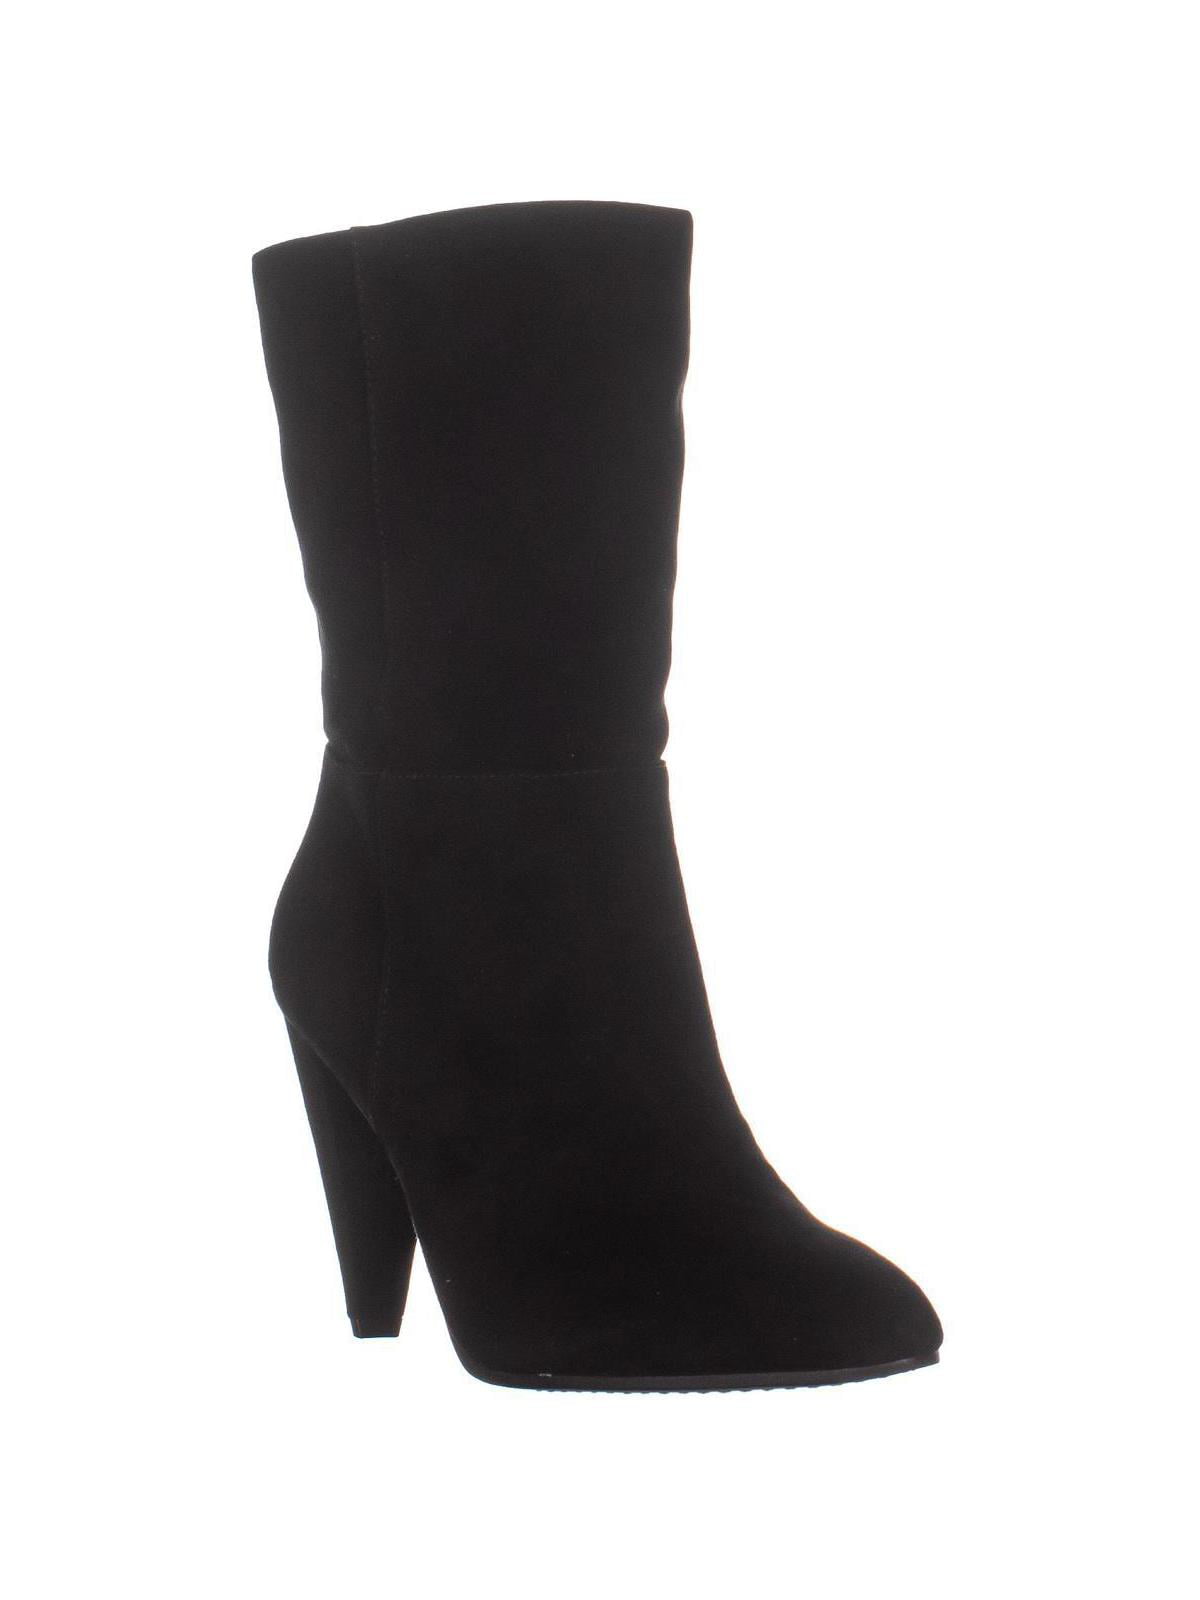 vince camuto ezabelle booties